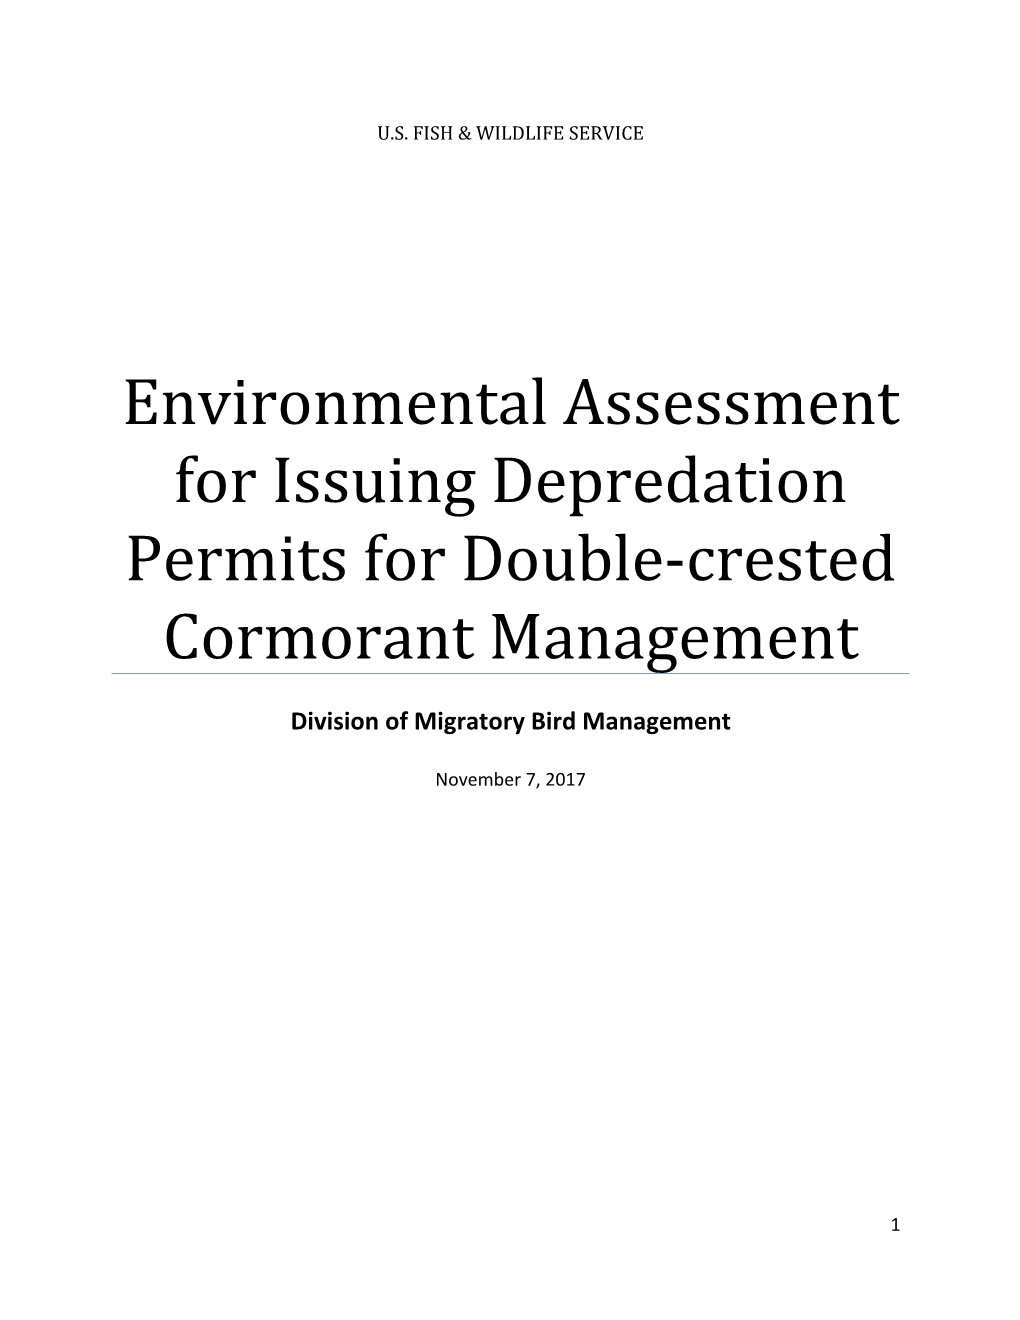 Environmental Assessment for Issuing Depredation Permits for Double-Crested Cormorant Management